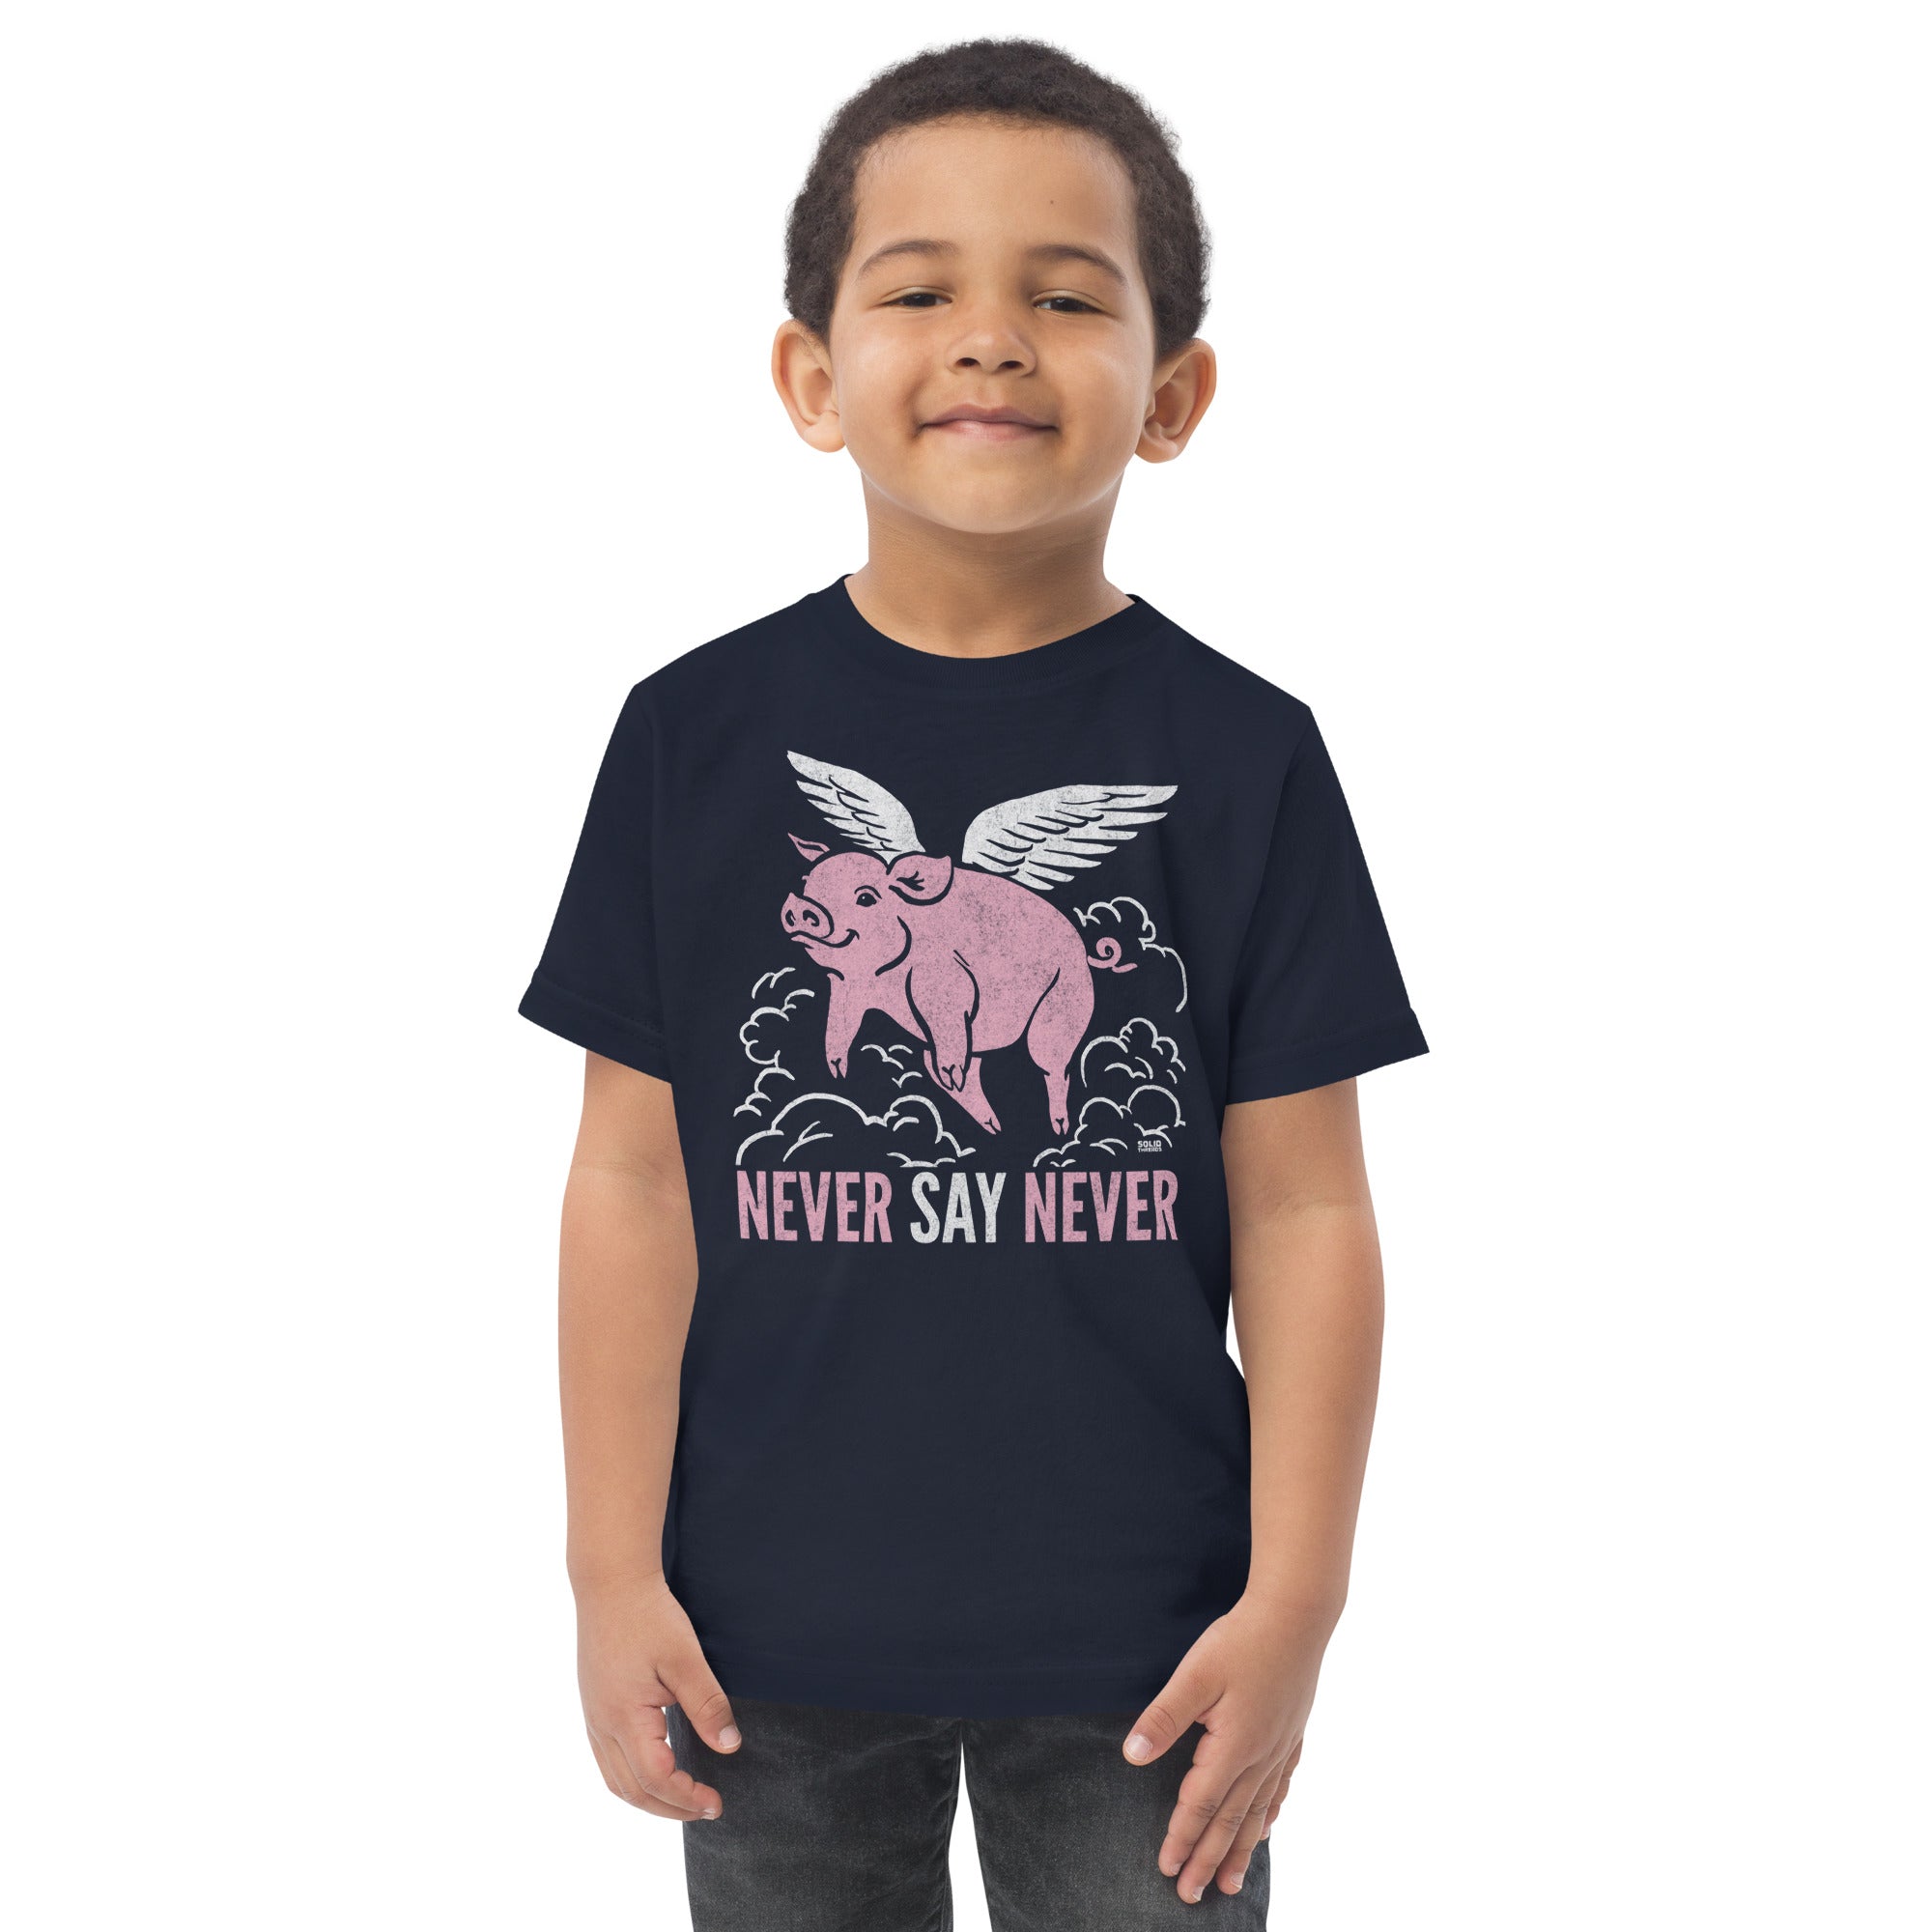 Toddler's Never Say Never Funny Extra Soft T-Shirt | Retro Optimism Tee On Model | Solid Threads